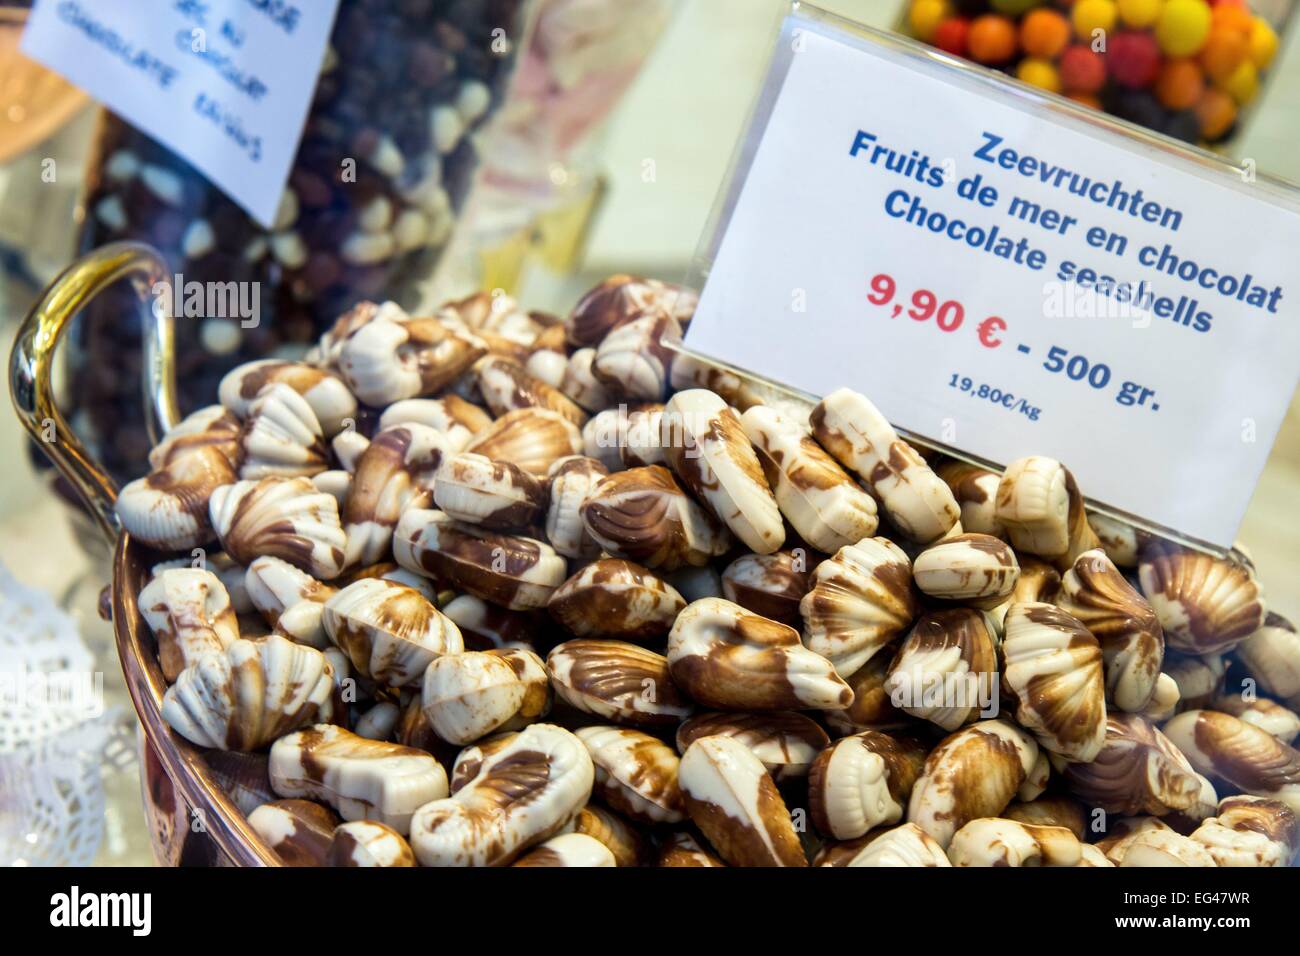 Belgium: Belgian chocolate (Fruits de mer) in confectionery shop in Bruges. Photo from 30 August 2014. Stock Photo